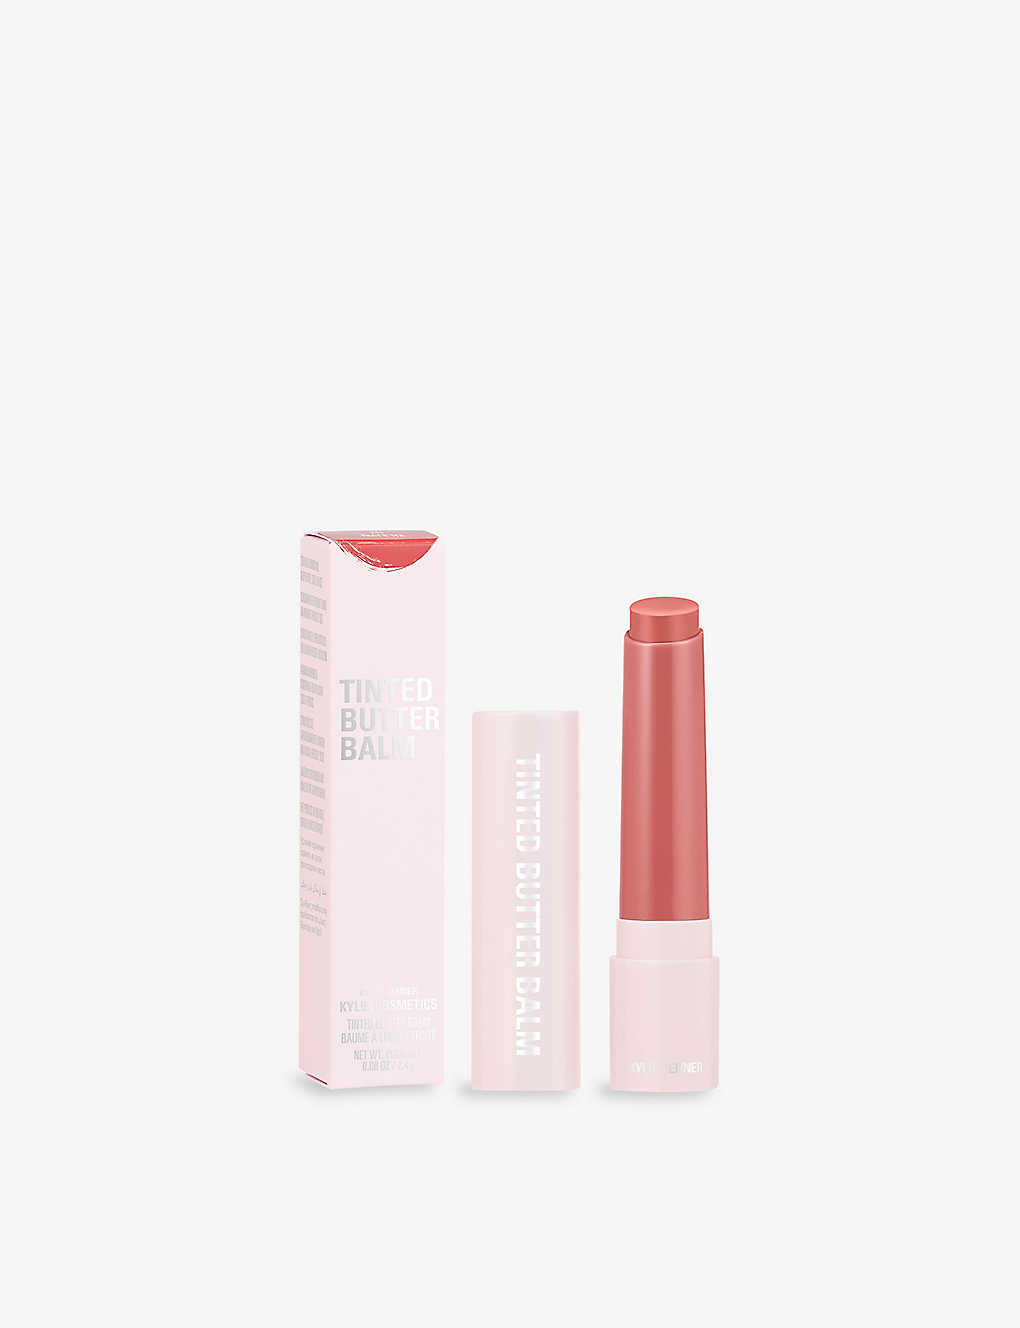 Kylie By Kylie Jenner Thats Tea Tinted Butter Balm 2.4g